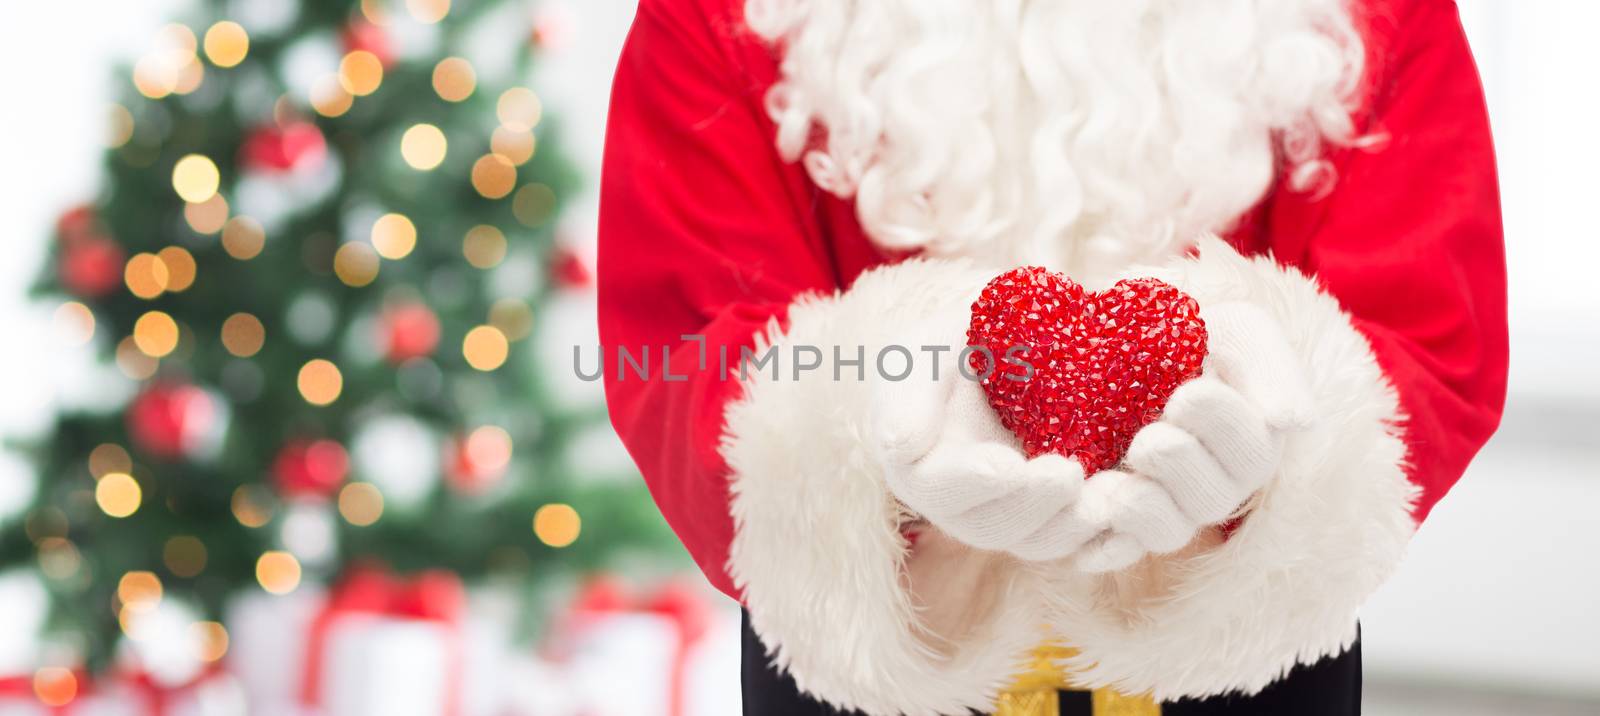 christmas, holidays, love, charity and people concept - close up of santa claus with heart shape decoration over living room with tree